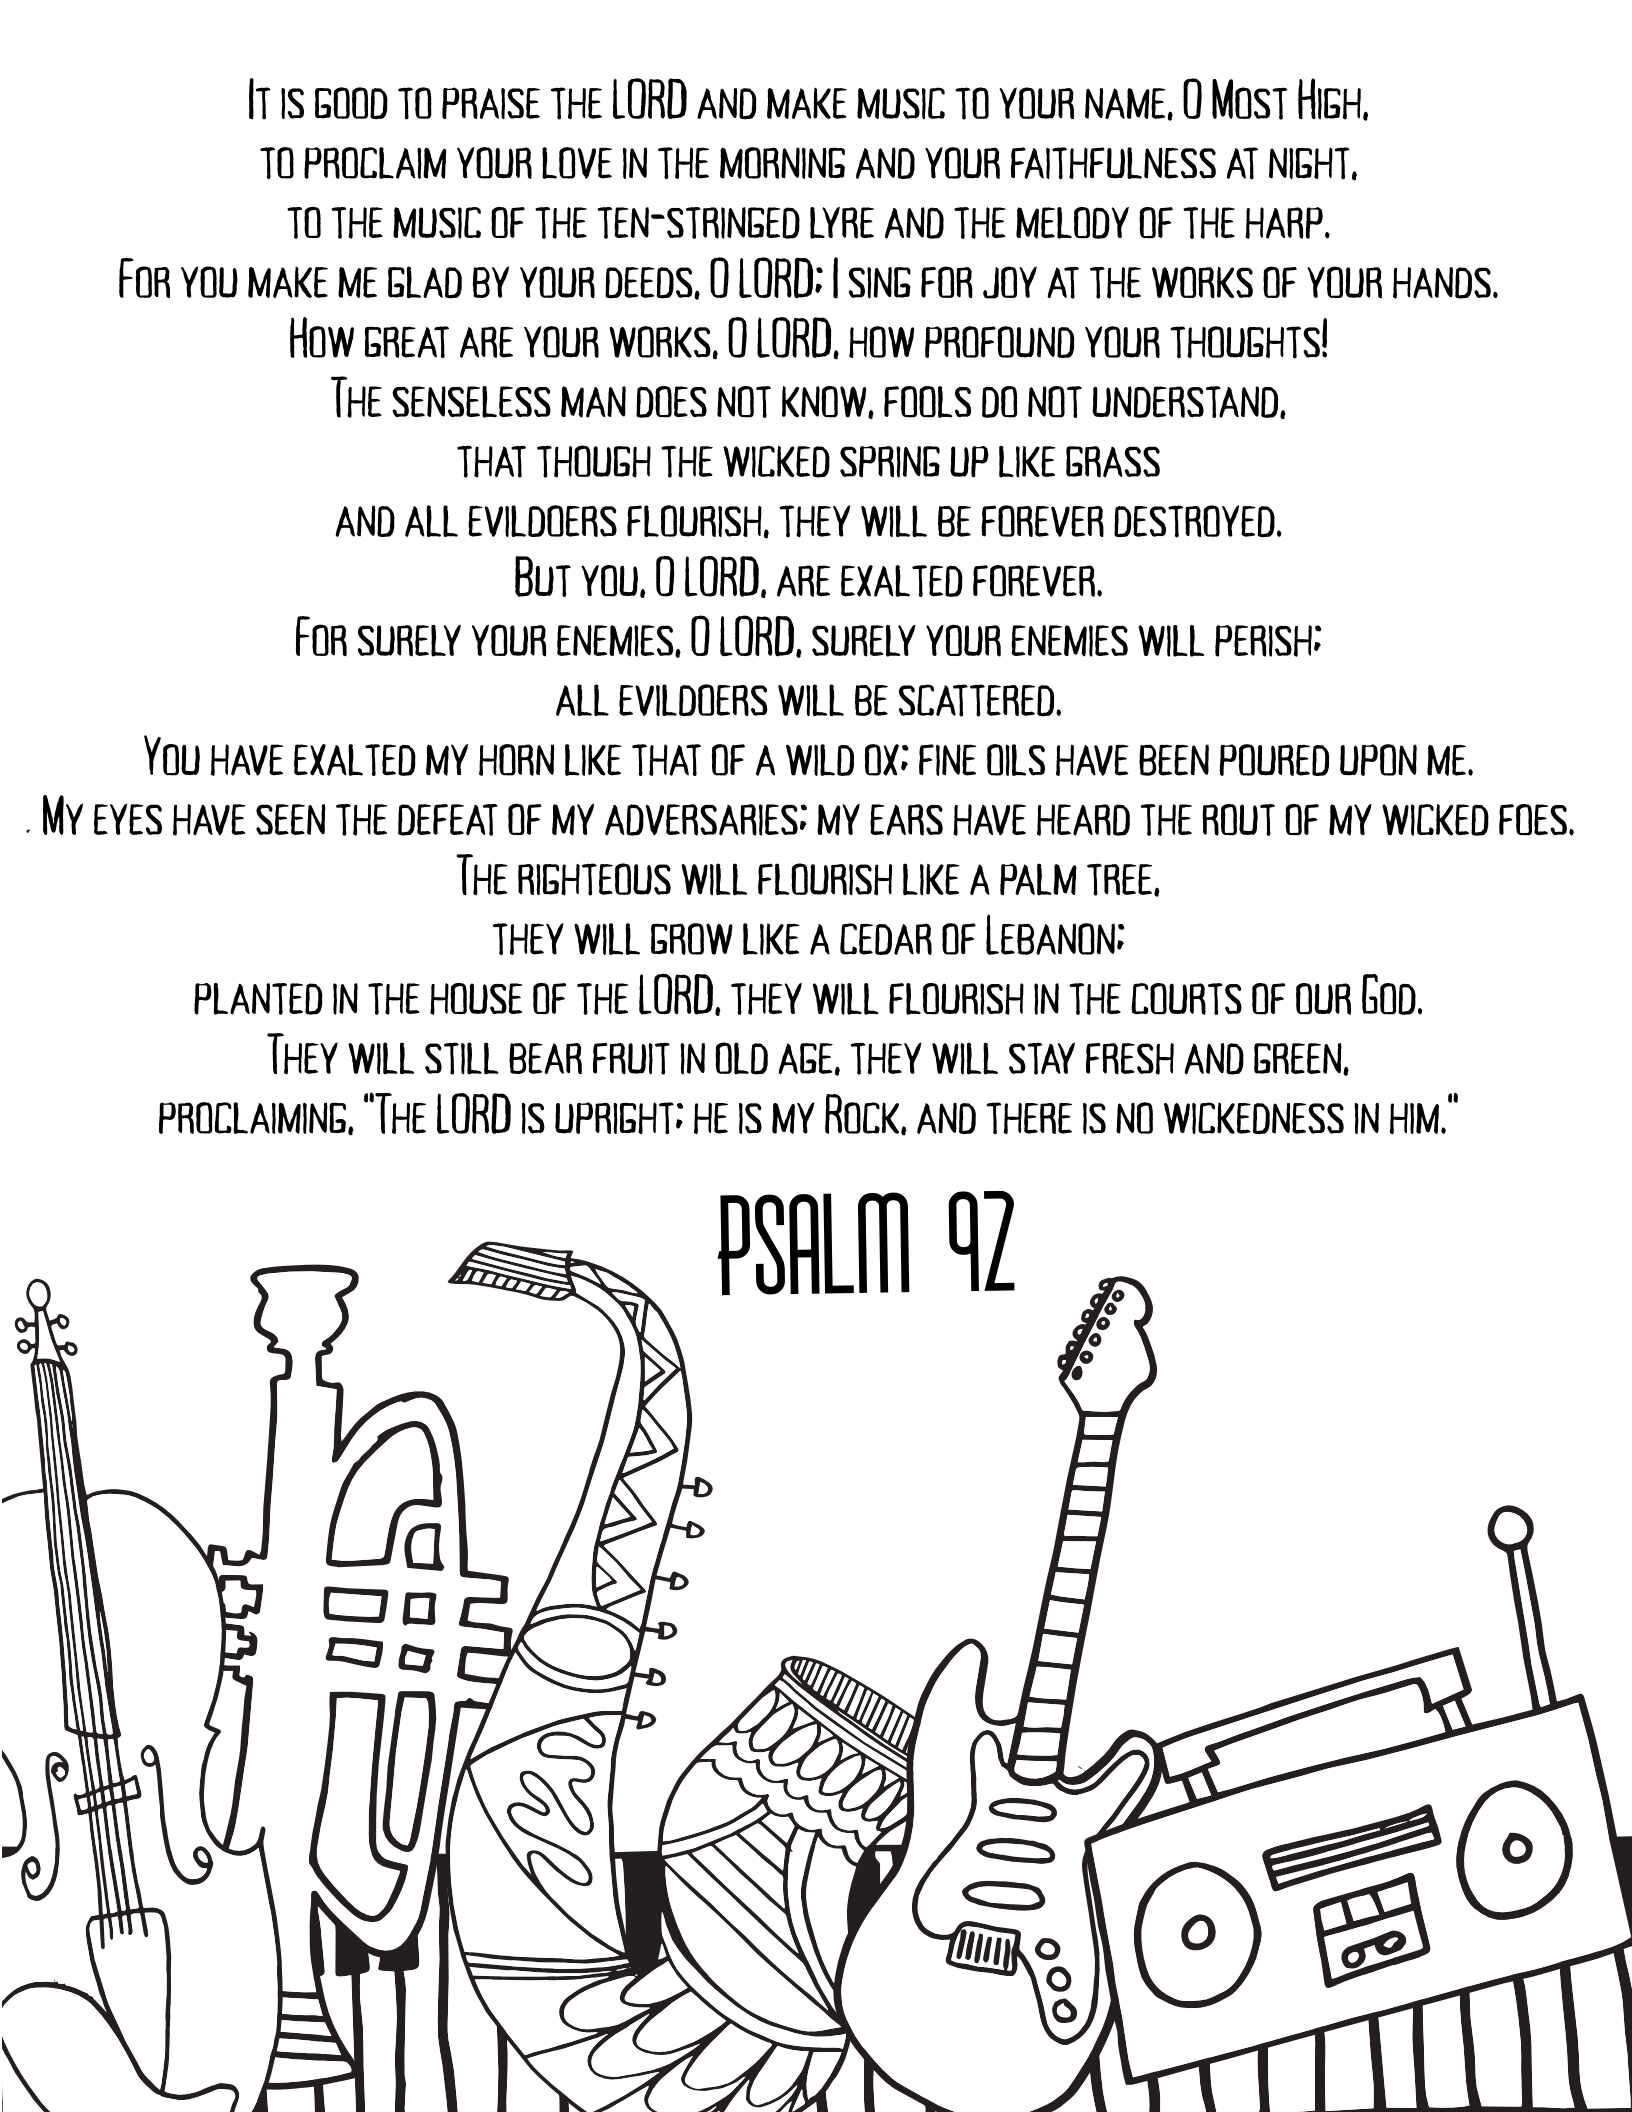 10 Free Printable Psalm Coloring Pages - Download and Color Adult Scripture - Psalm 92CLICK HERE TO DOWNLOAD THIS PAGE FREE